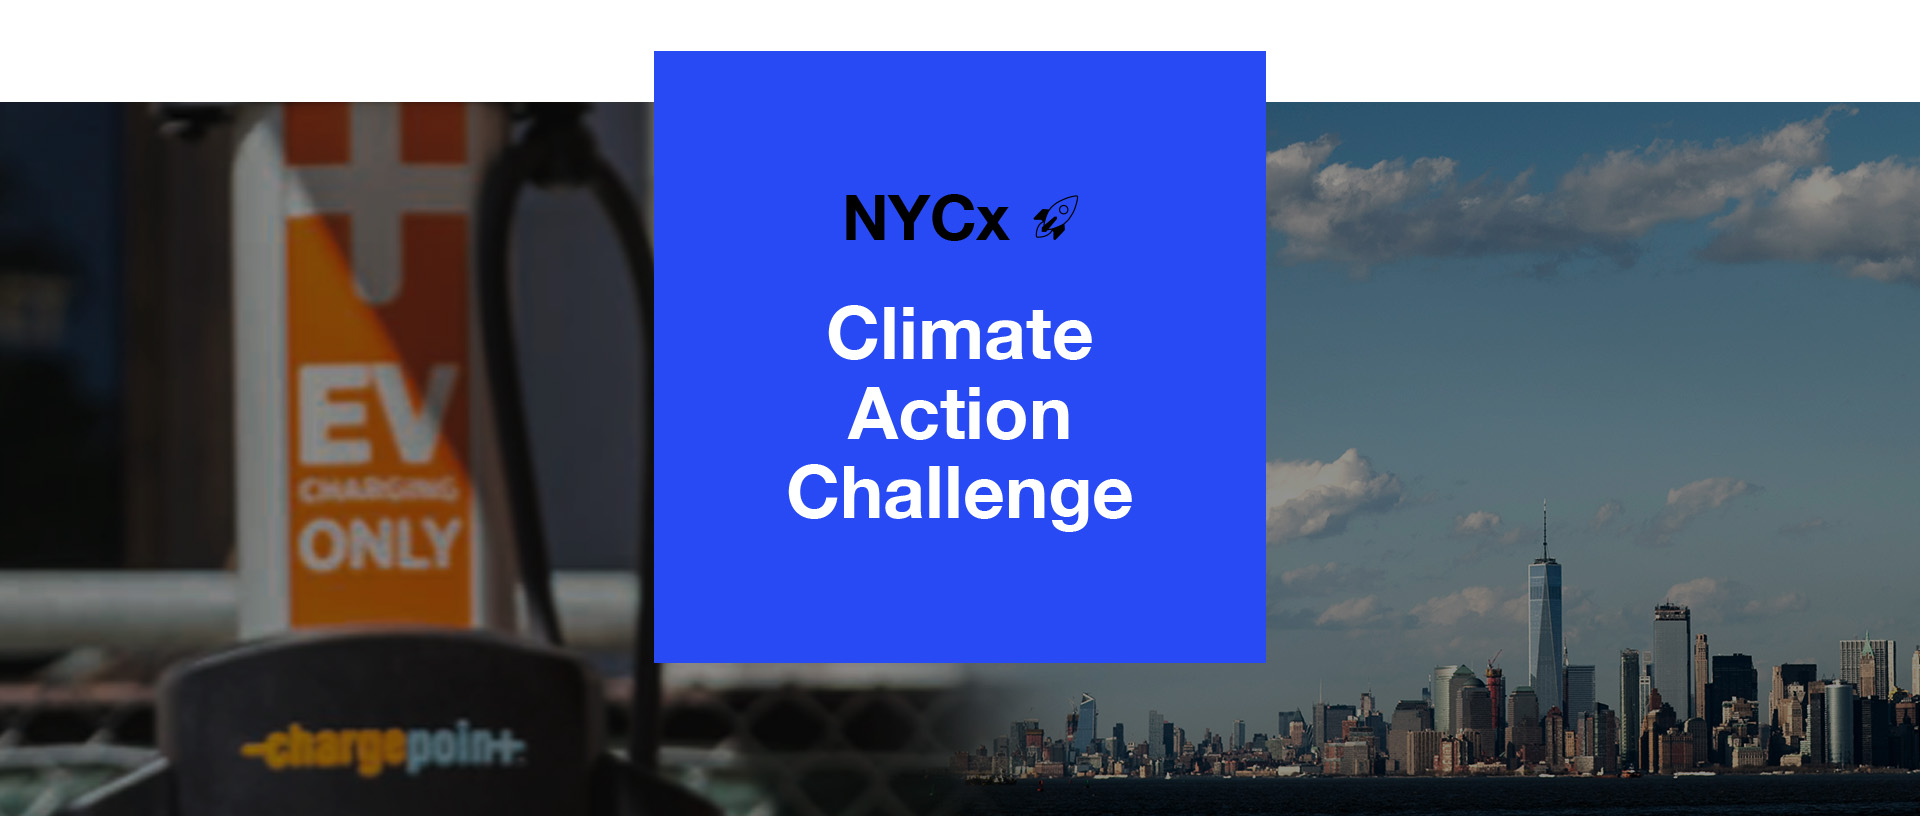 NYCx climate action challenge